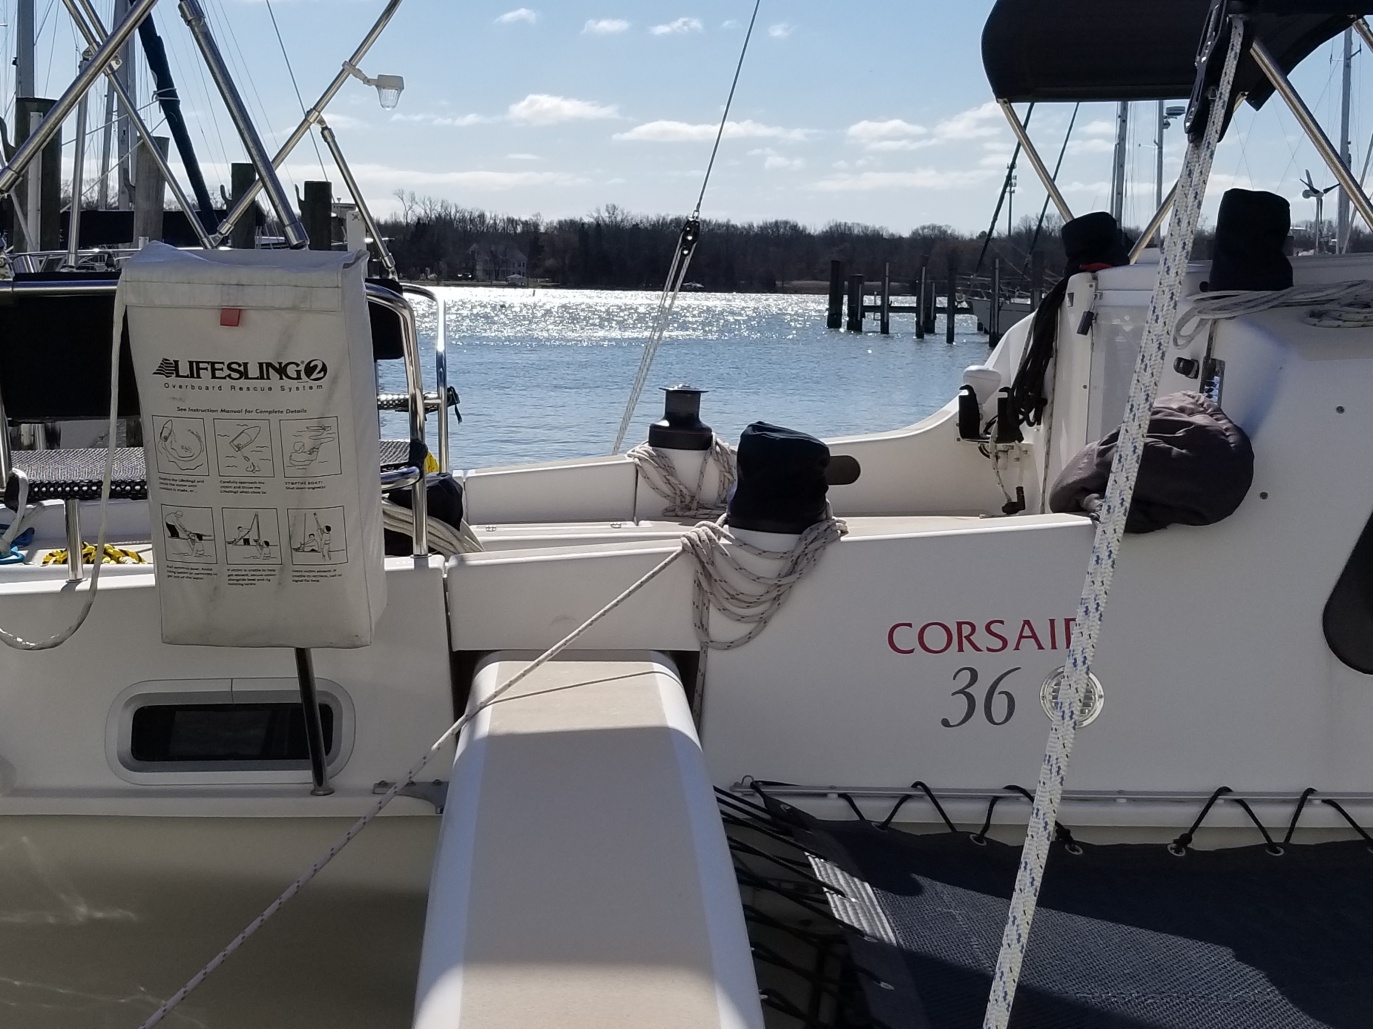 SOLD] Corsair 36 for sale - Cruisers & Sailing Forums